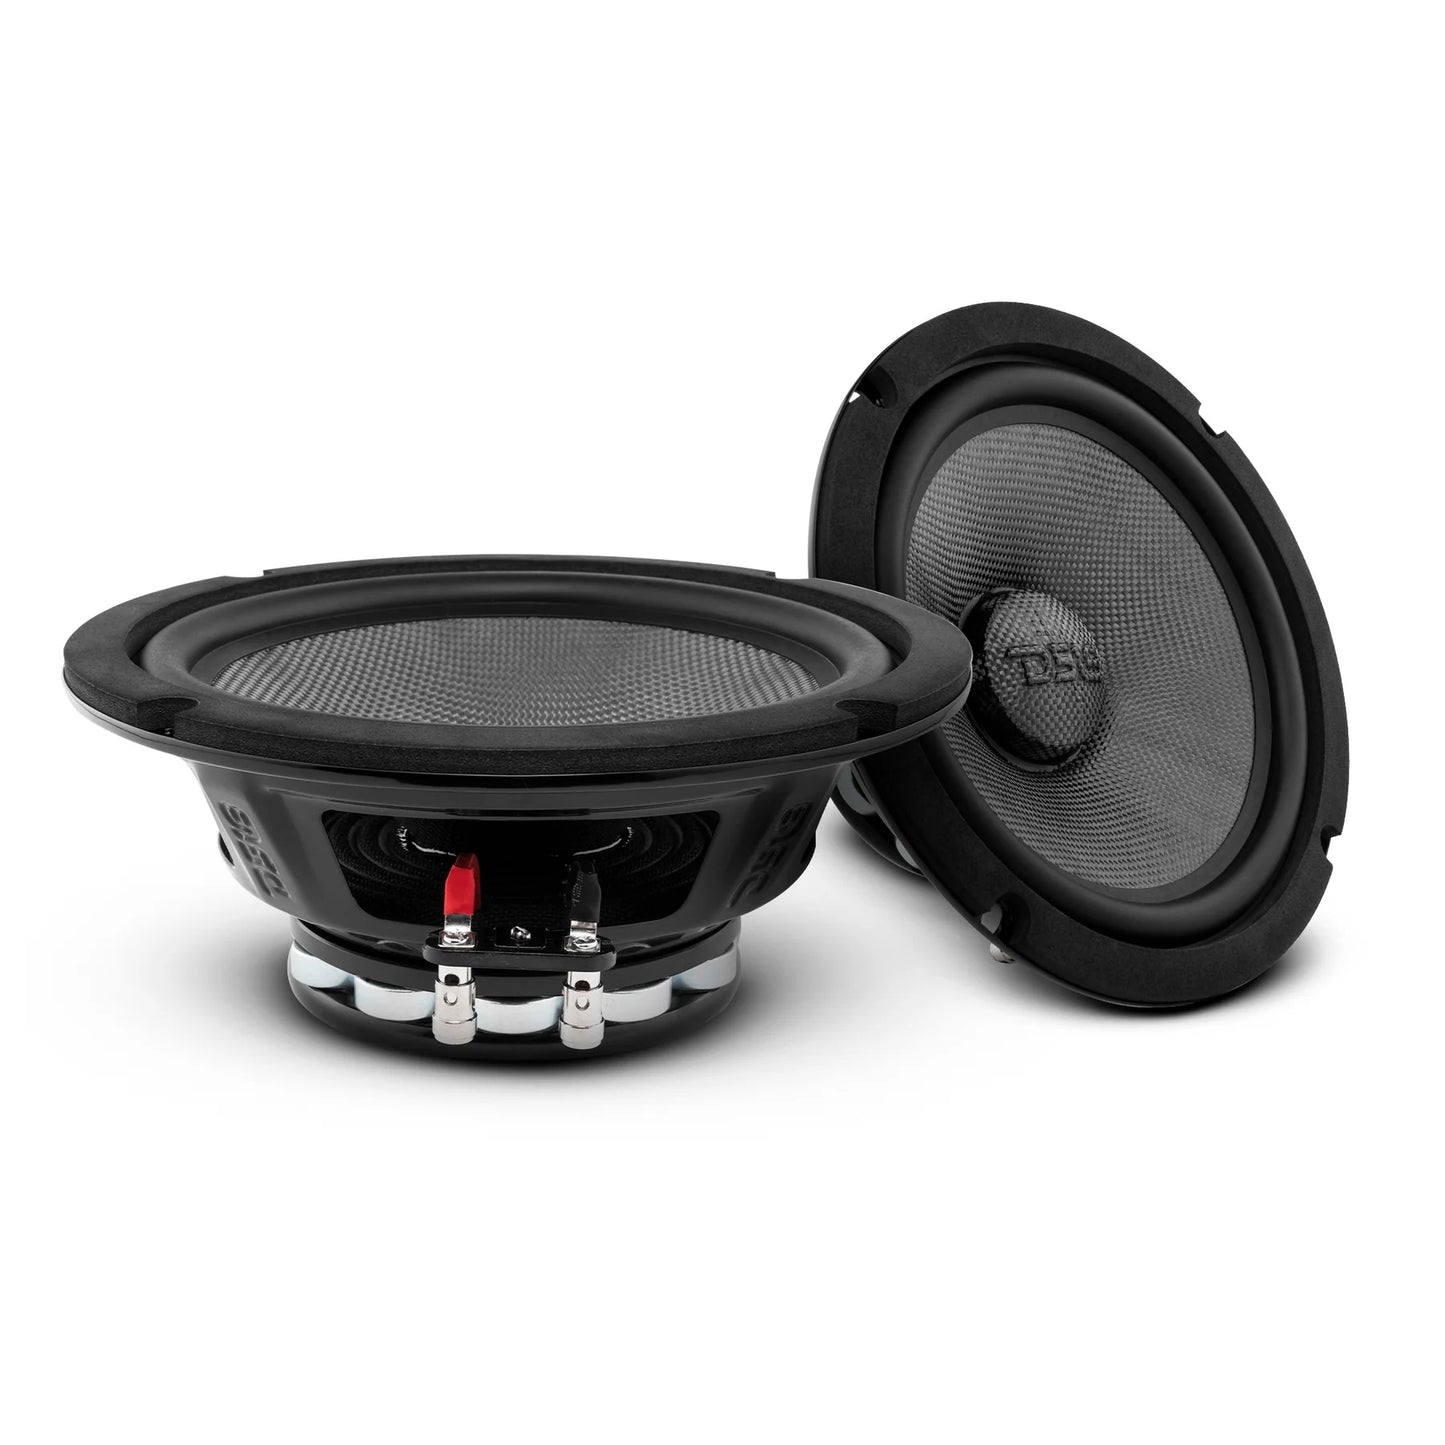 DS18 PRO-CF8.4NR 8" Mid-Bass Loudspeaker with Water Resistant Carbon Fiber Cone And Neodymium Rings Magnet 600 Watts 4-Ohm